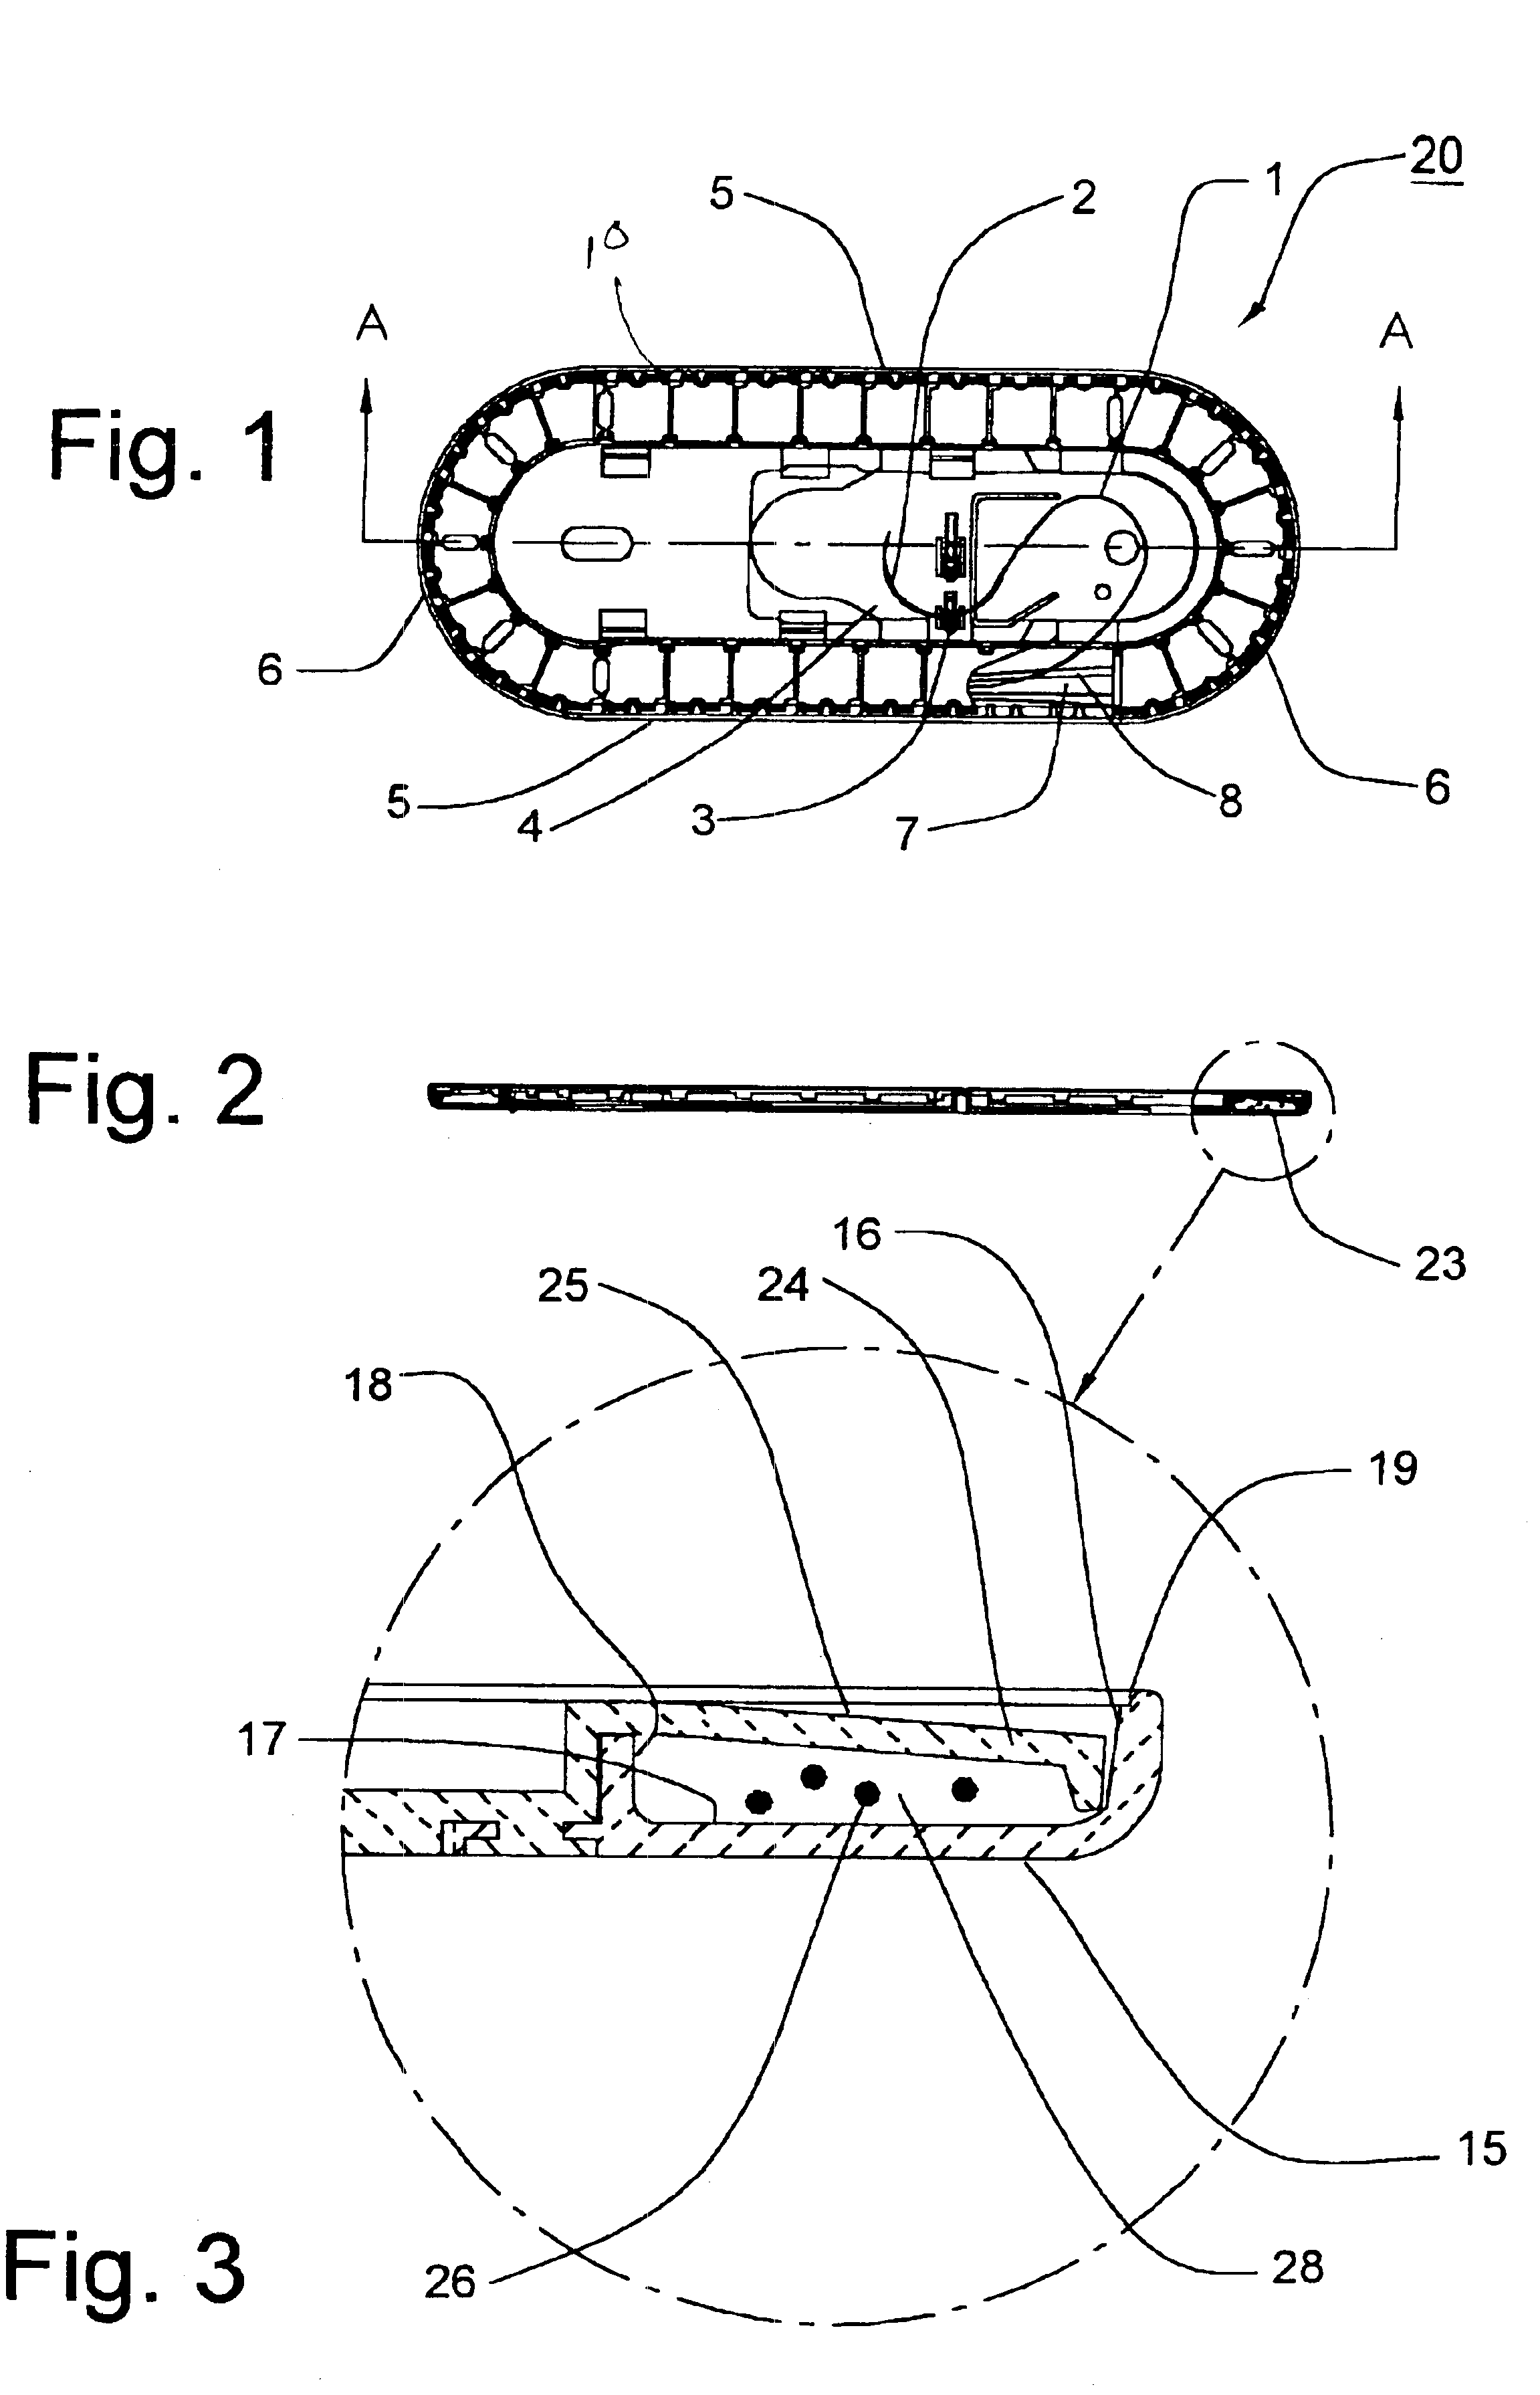 Method for assembling a package for sutures